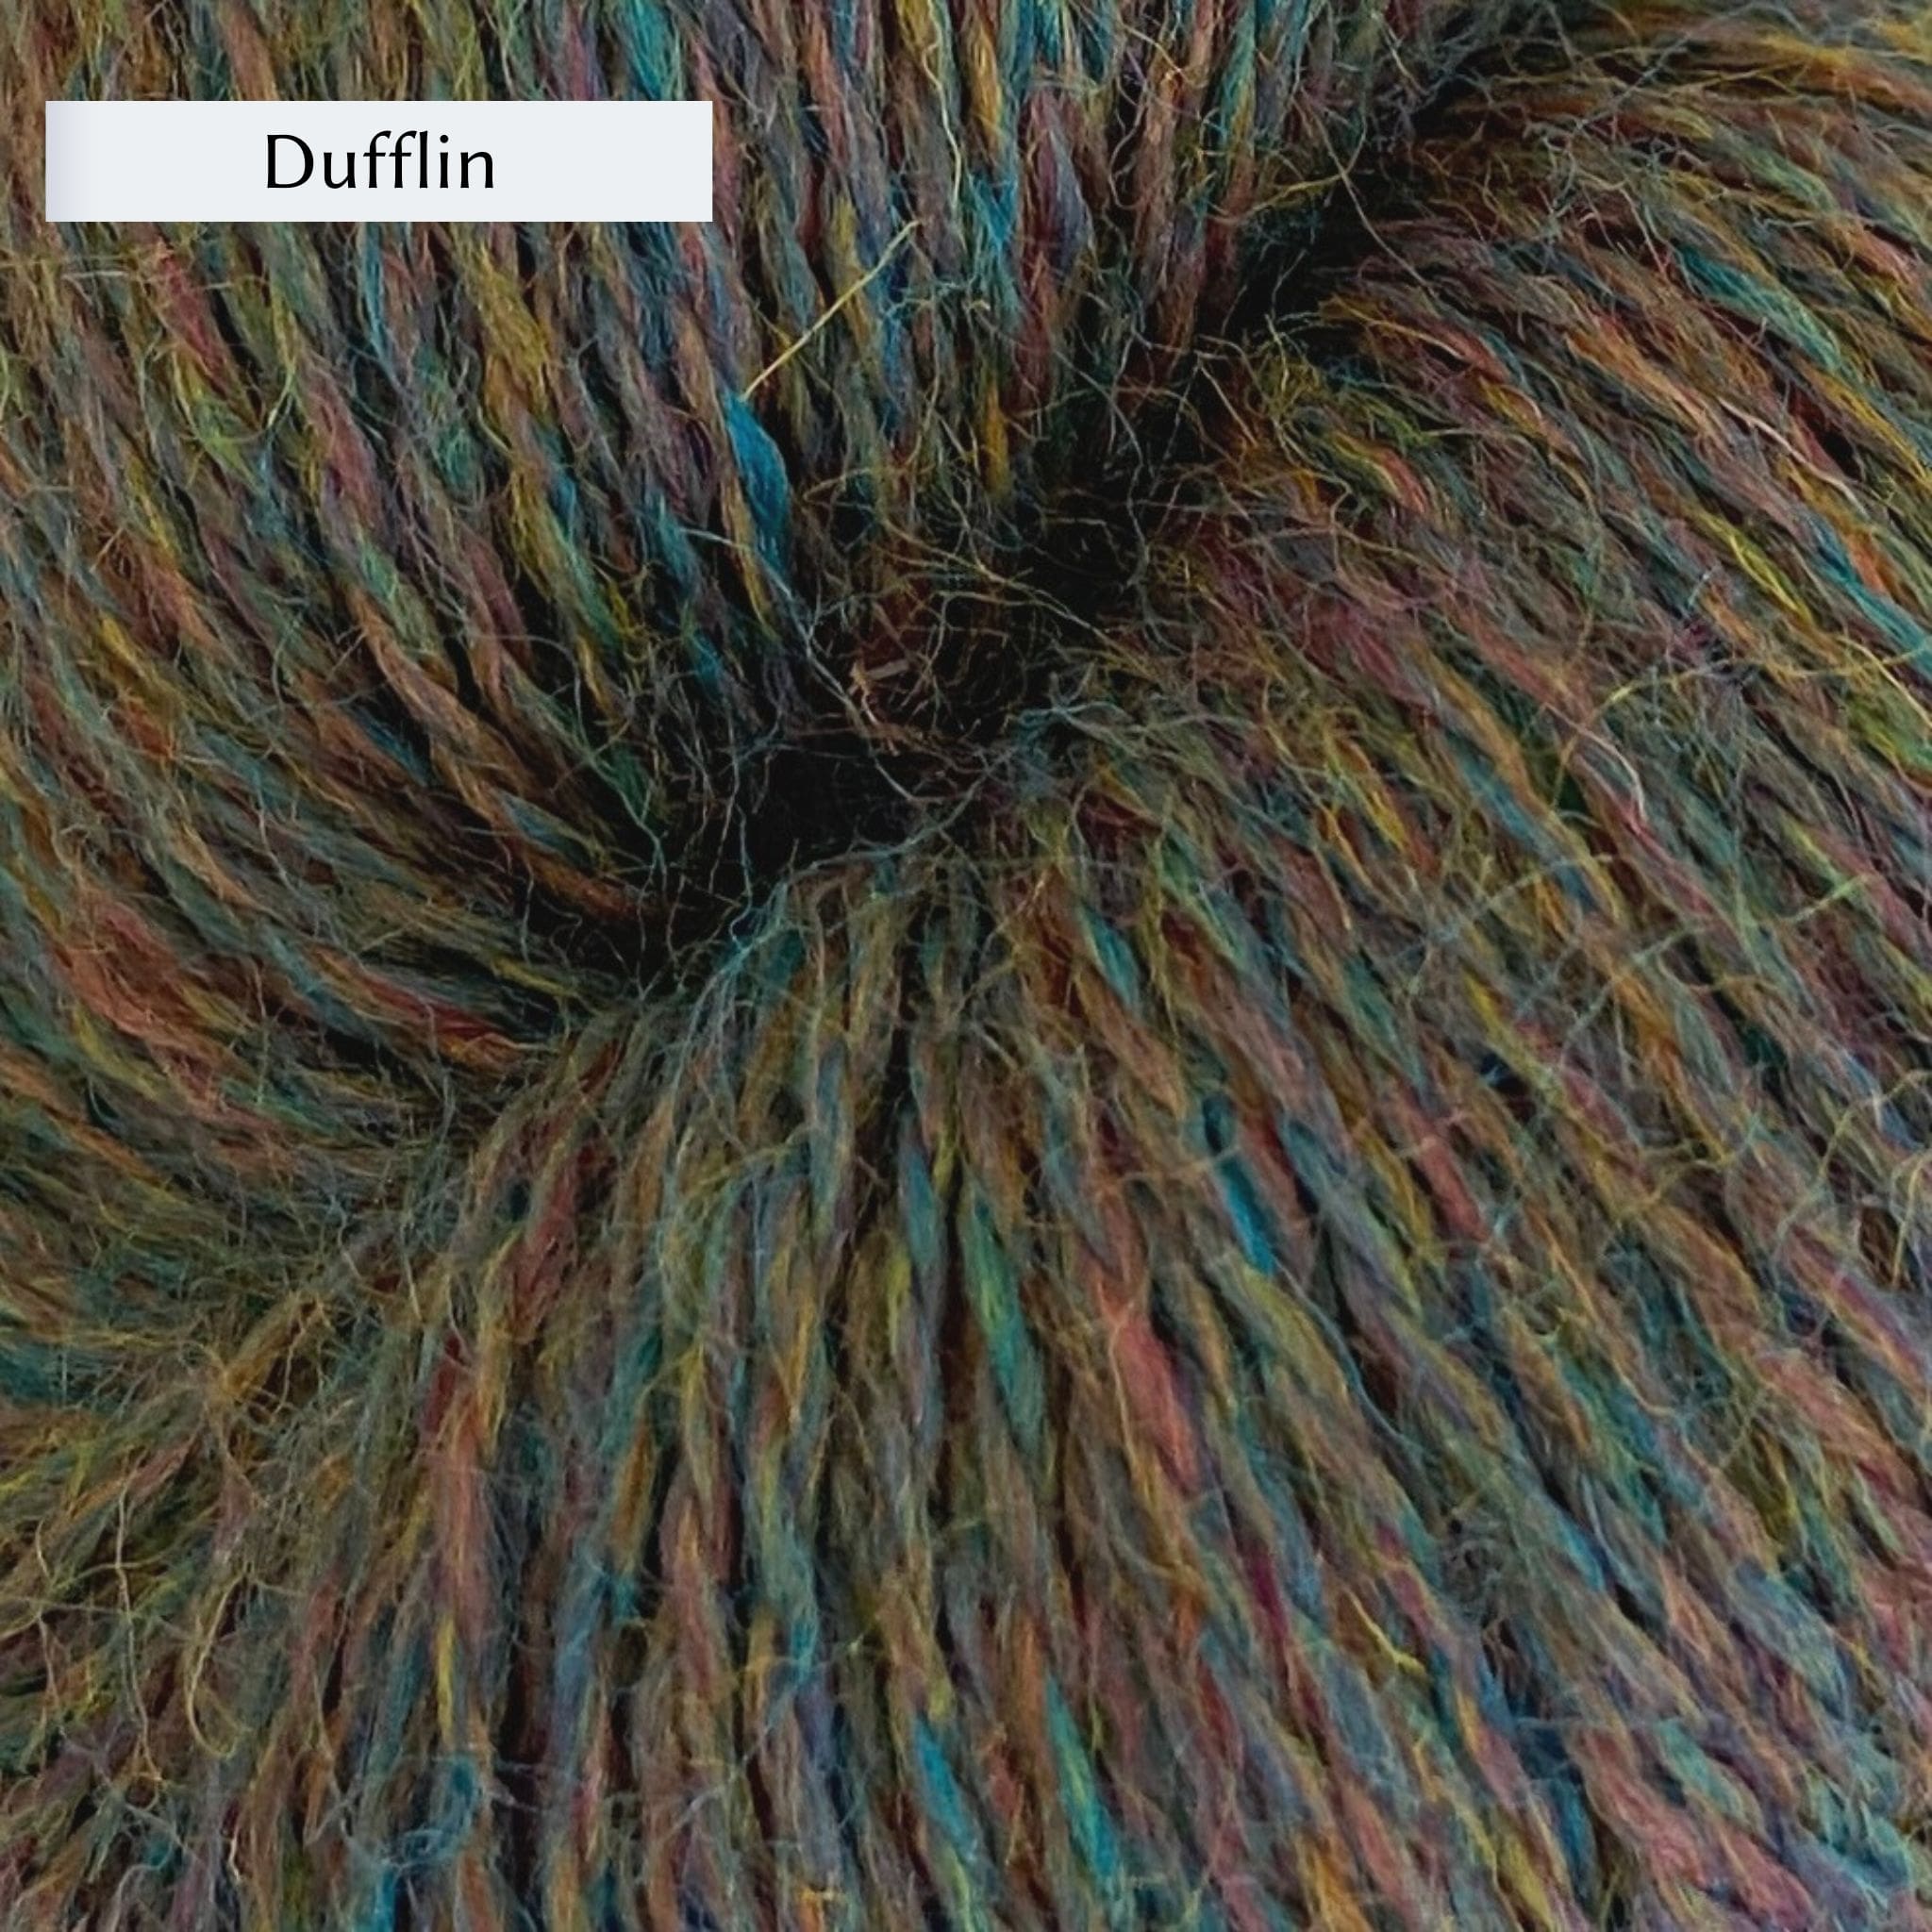 John Arbon Appledore DK, a DK weight British yarn, in color Dufflin, a mottled green with blue, red, and yellow 